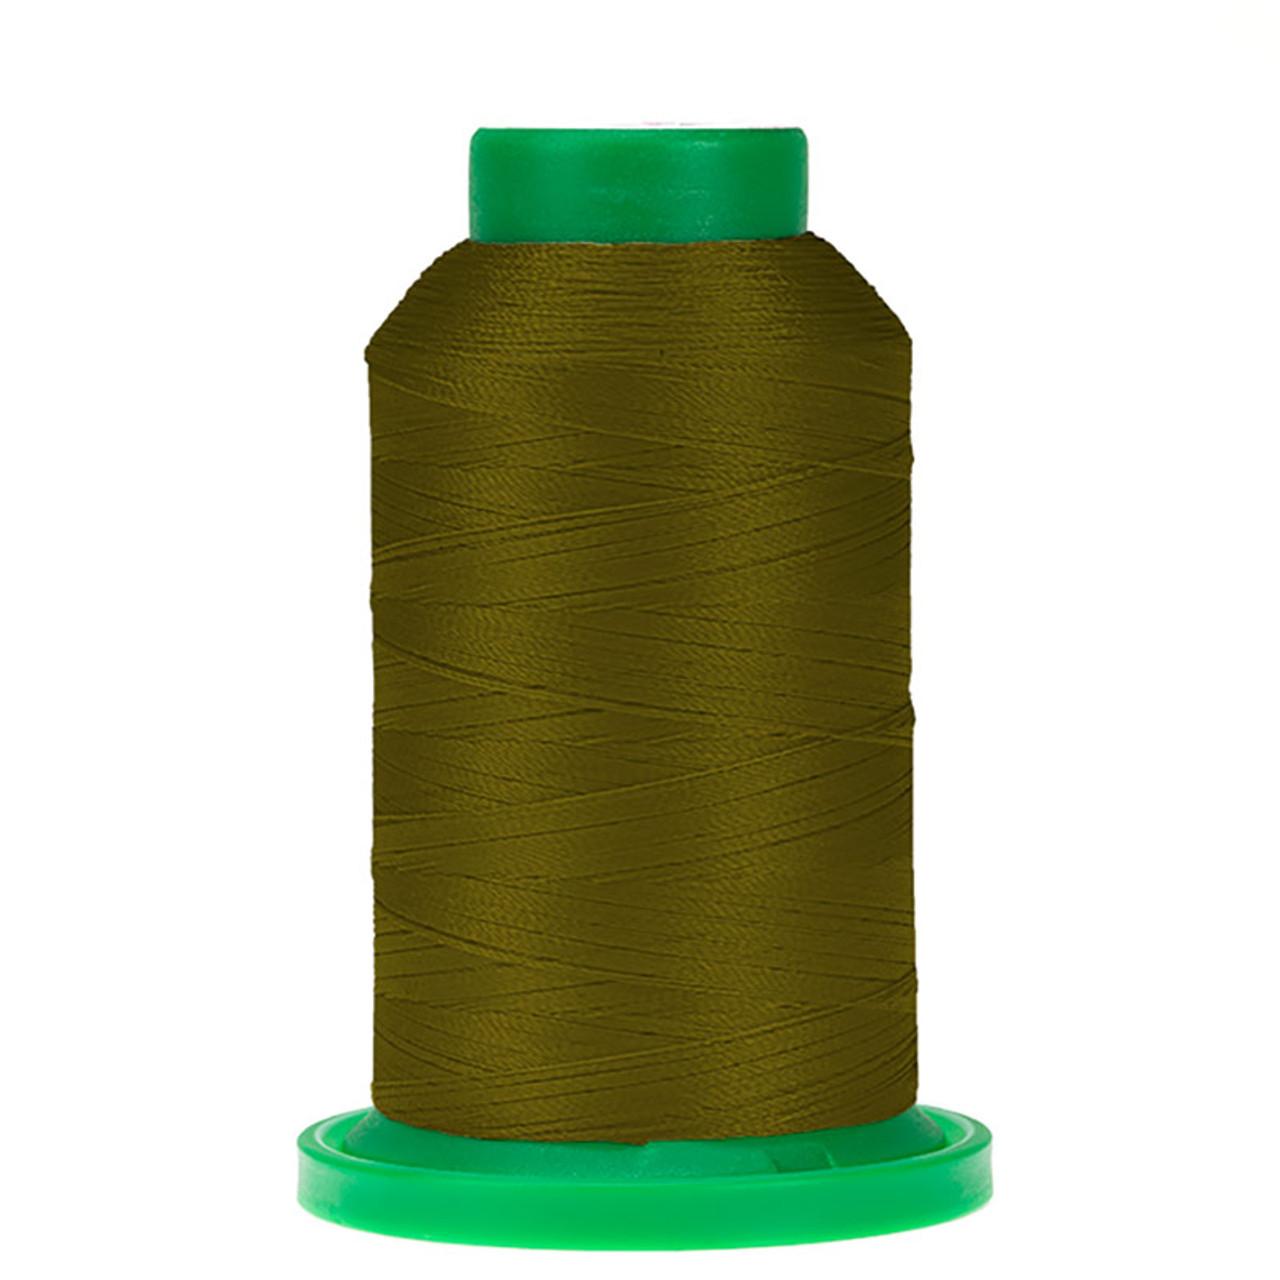 Thread - Isacord - Moss - 2922-0345 - Special Order